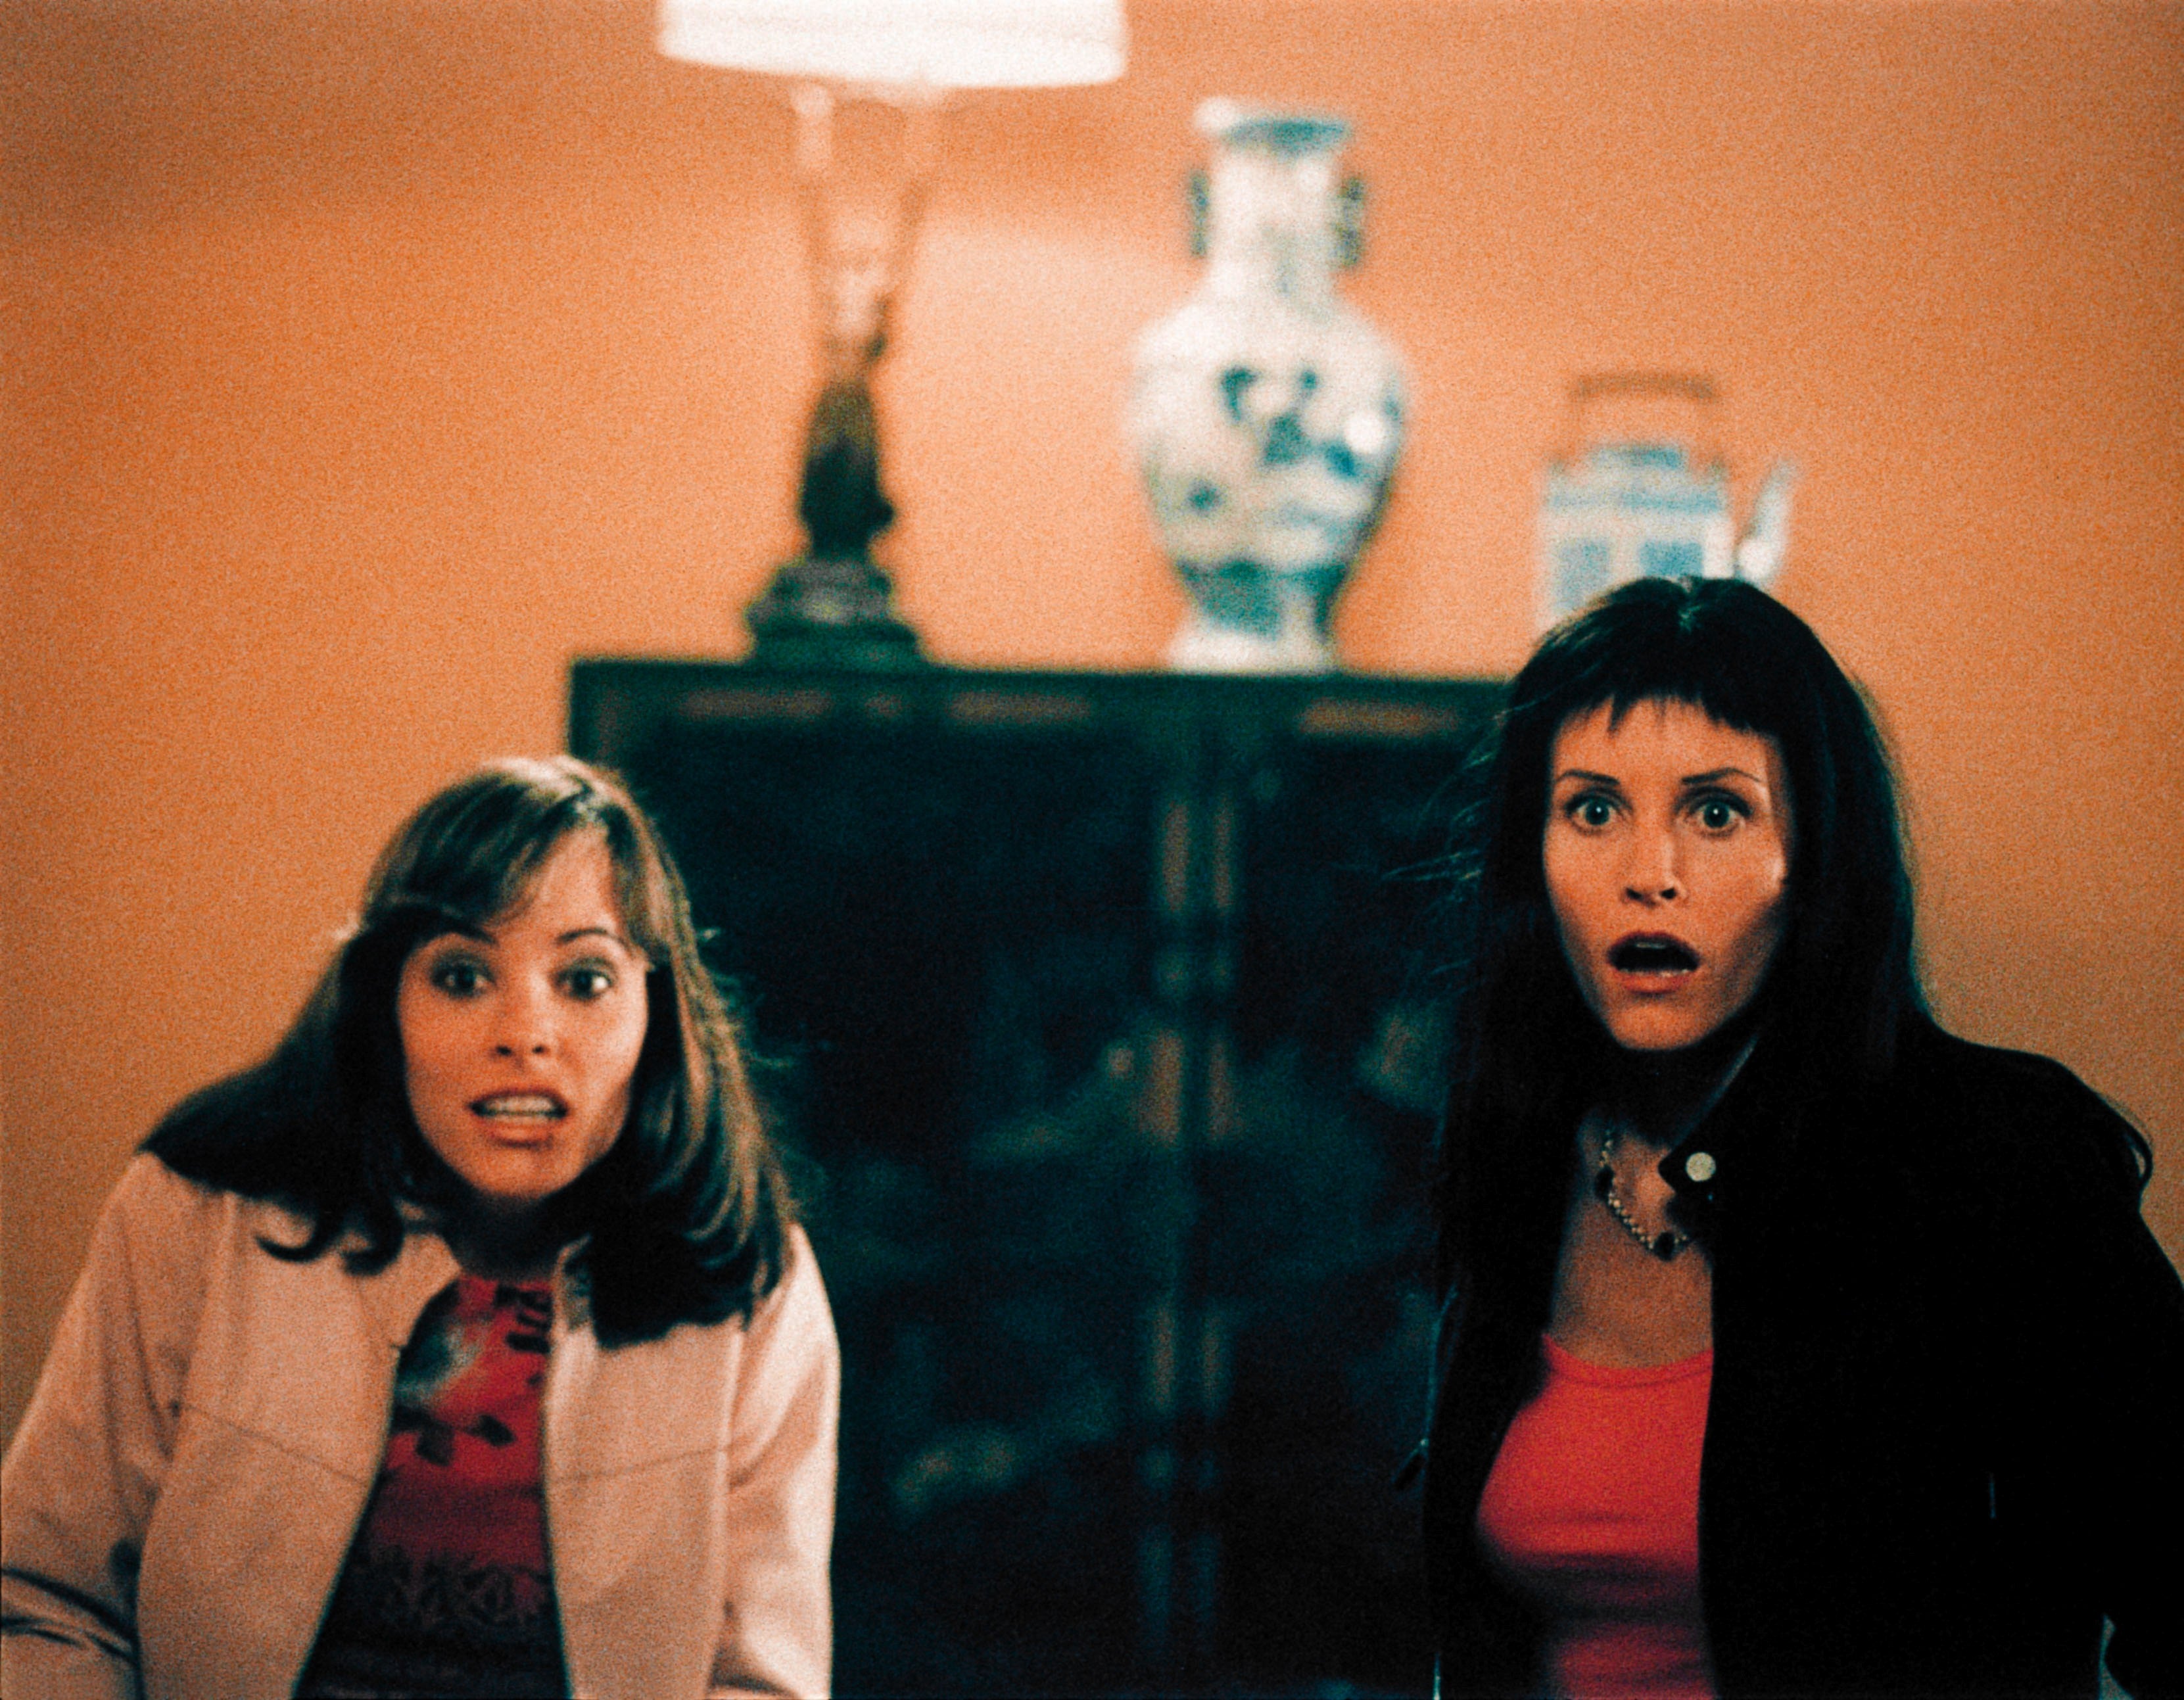 Parker Posey, Courteney Cox and her infamous fringe in Scream 3 (1999)